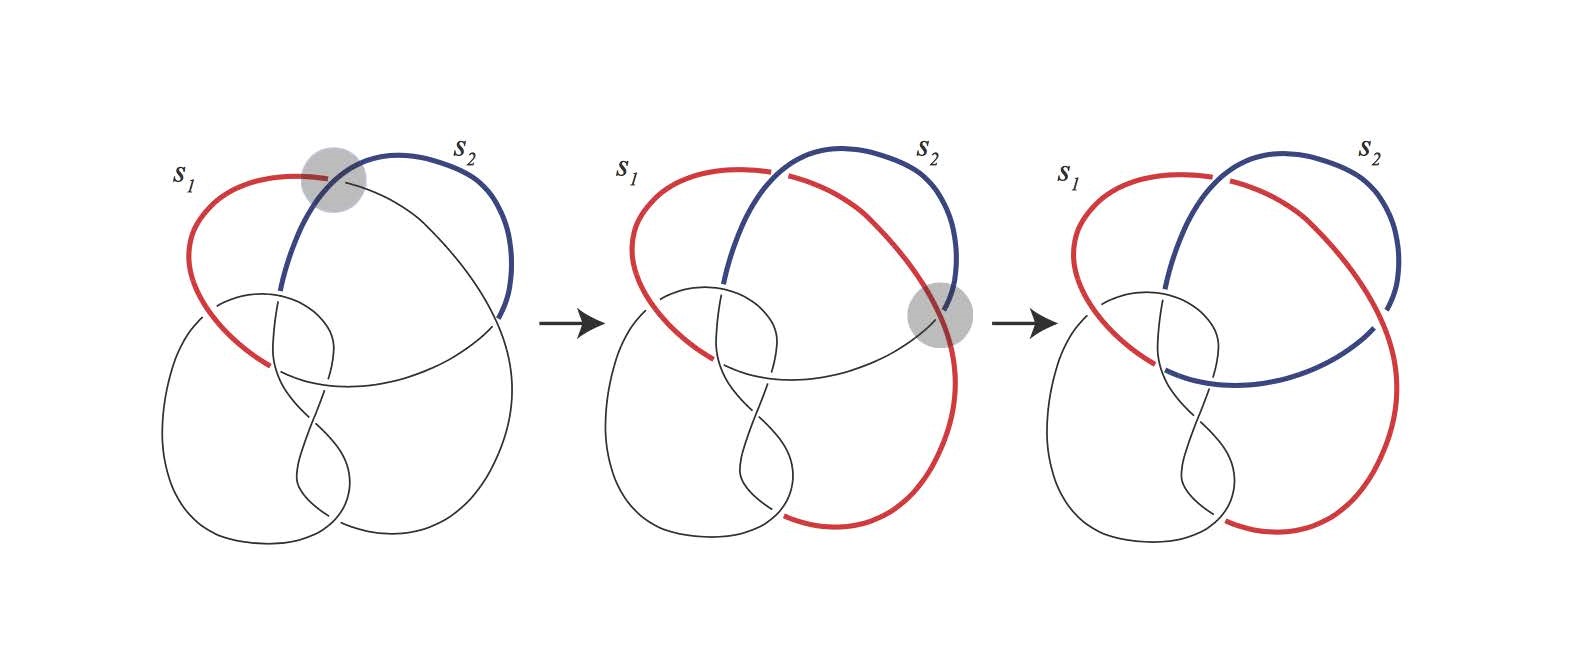 Image of partial colored knot diagram